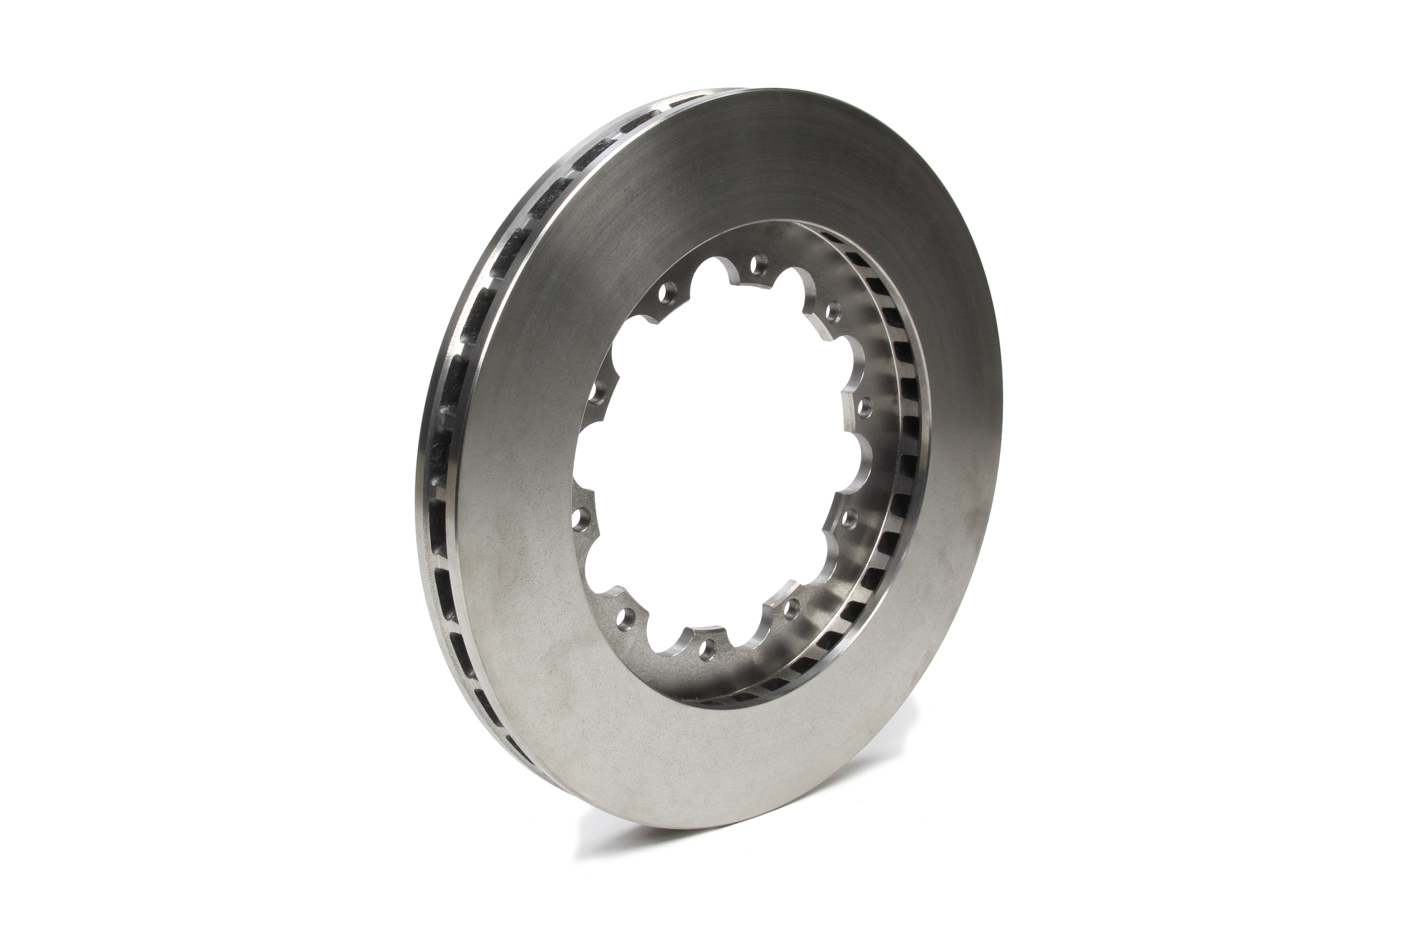 Brake Rotor - 11.000 in OD - 1.000 in Thick - 10 x 6.813 in Bolt Pattern - Iron - Natural - Coleman Pinto Hub - Each